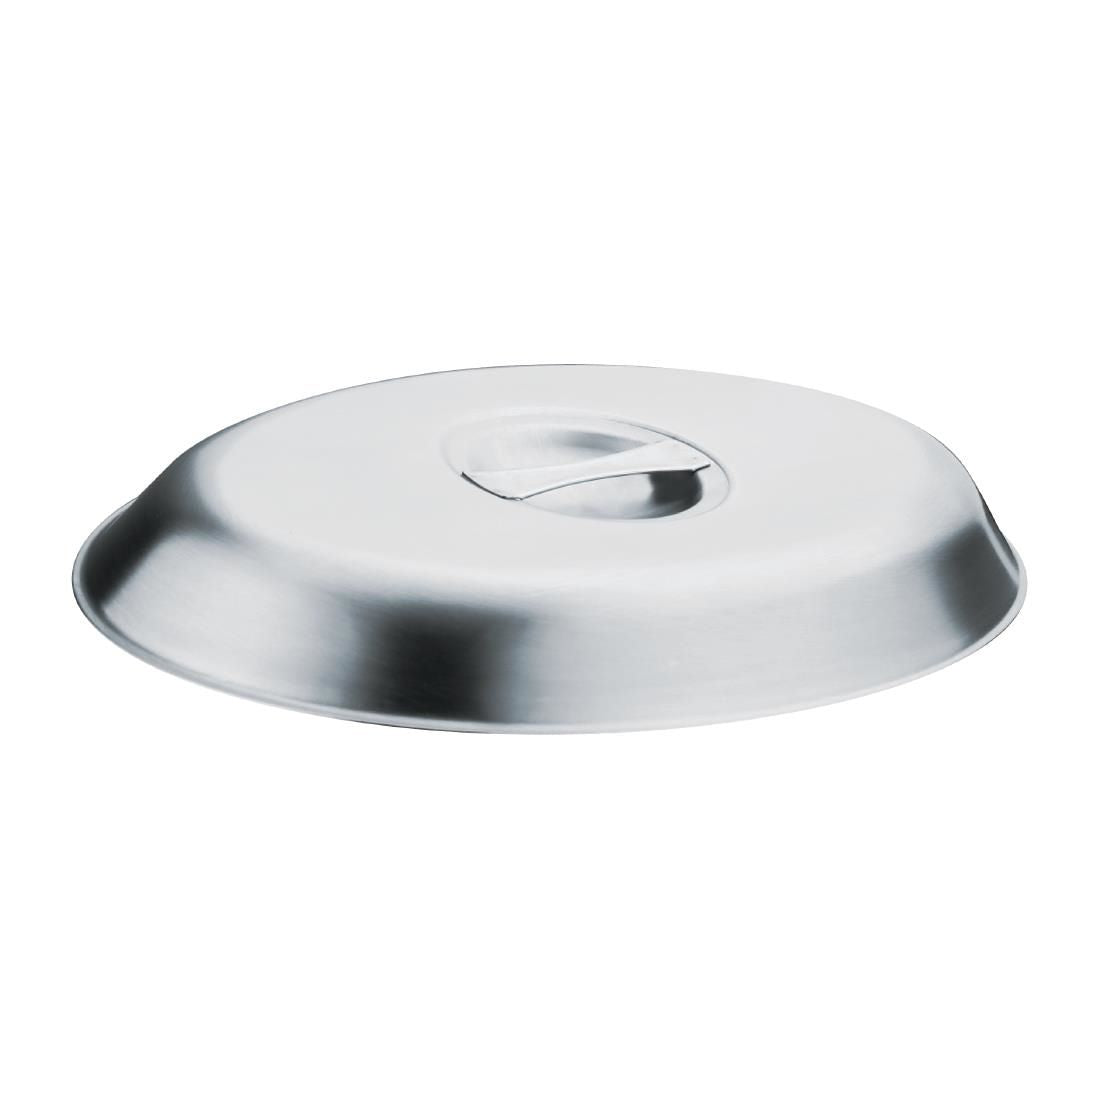 P182 Olympia Oval Vegetable Dish Lid 250 x 170mm